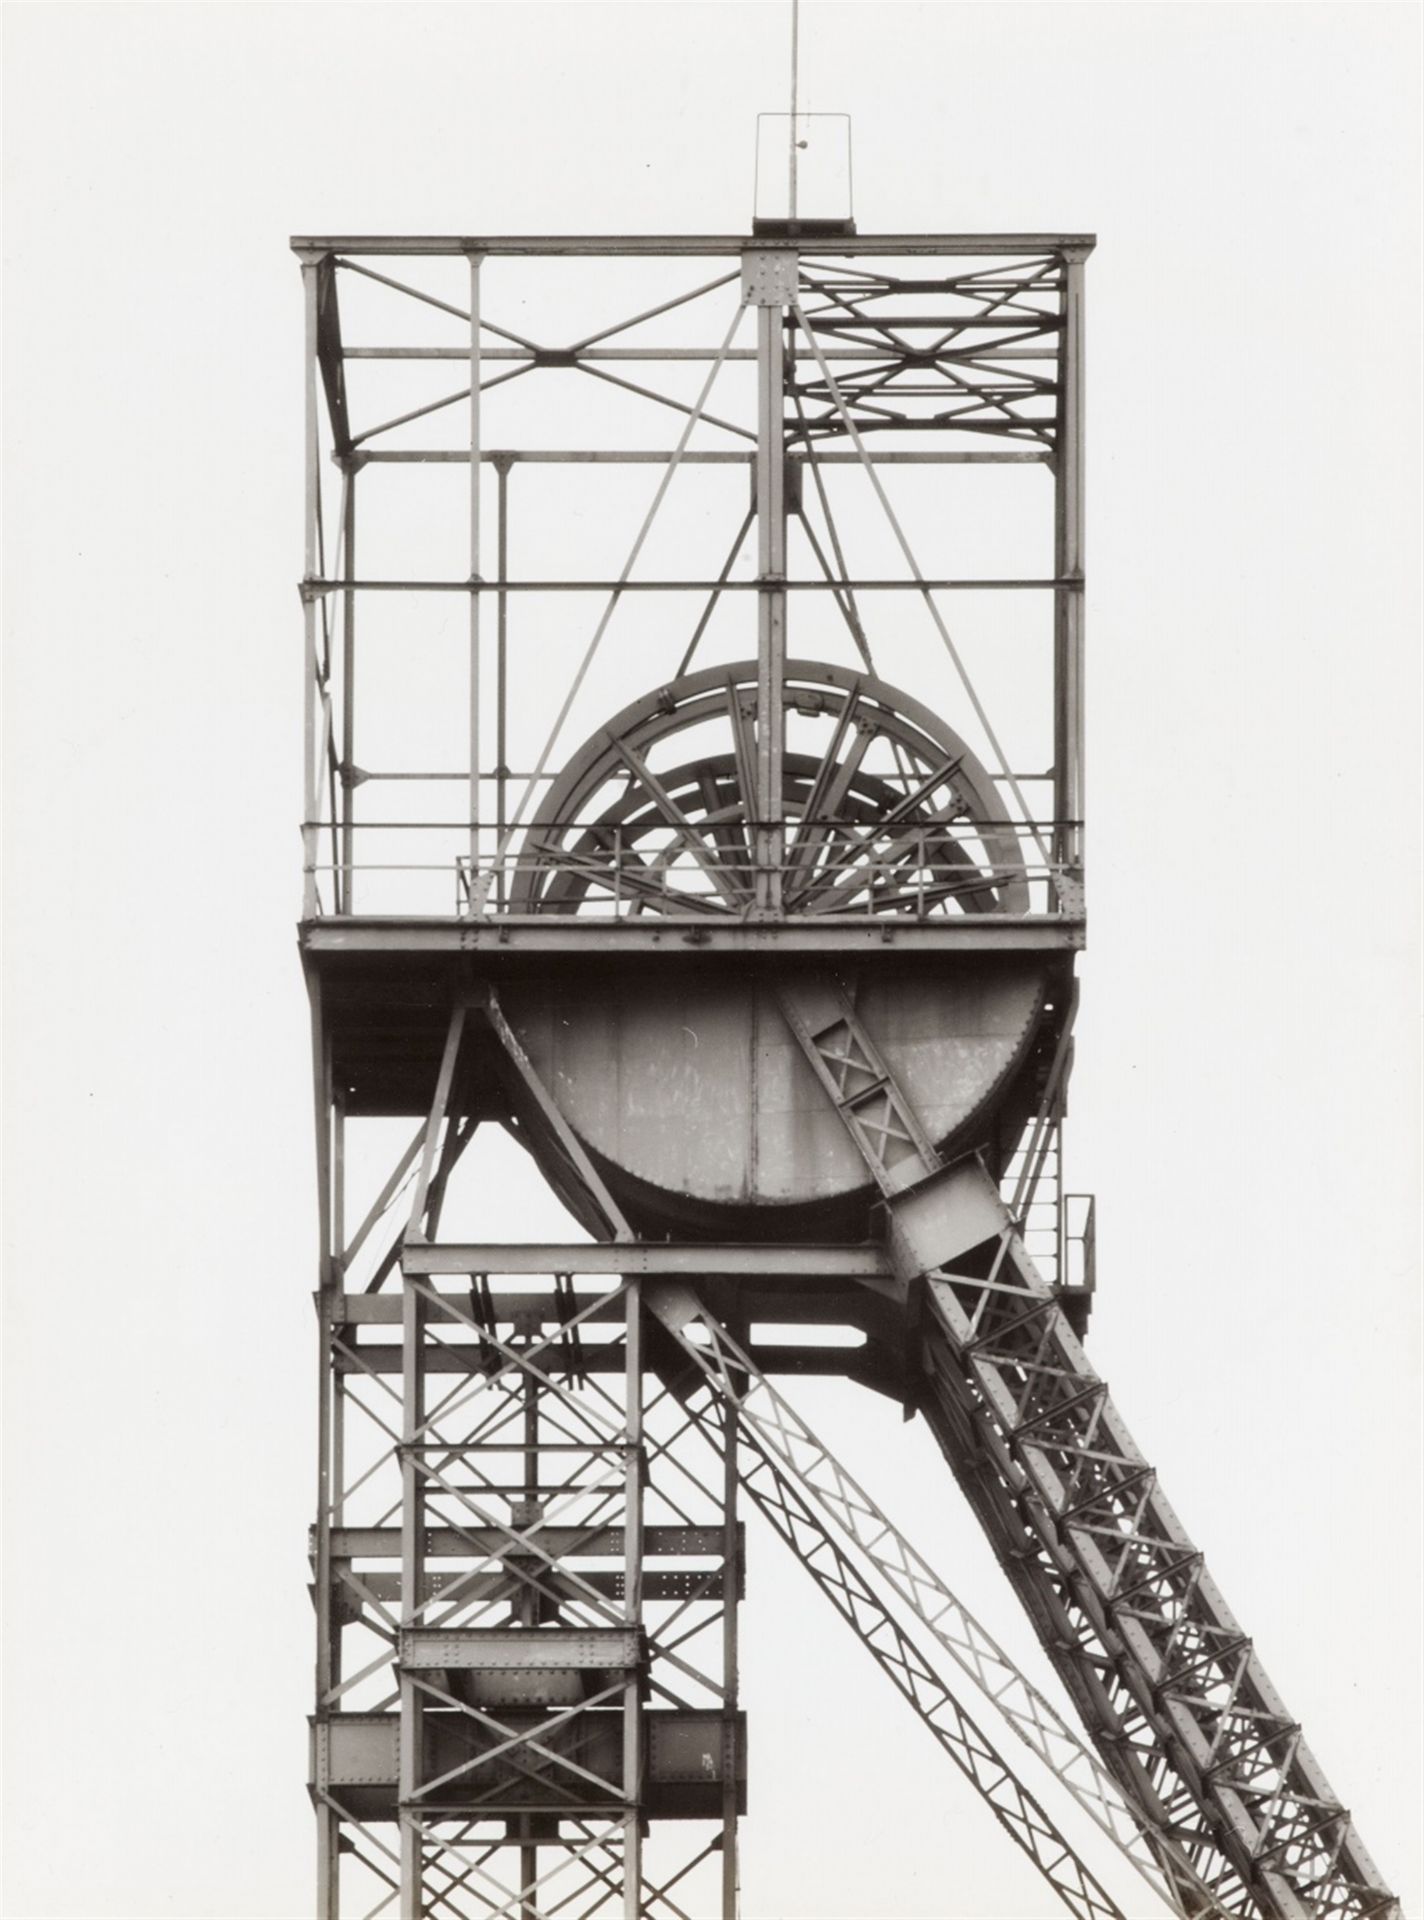 Bernd and Hilla Becher, Winding towers - Image 2 of 14